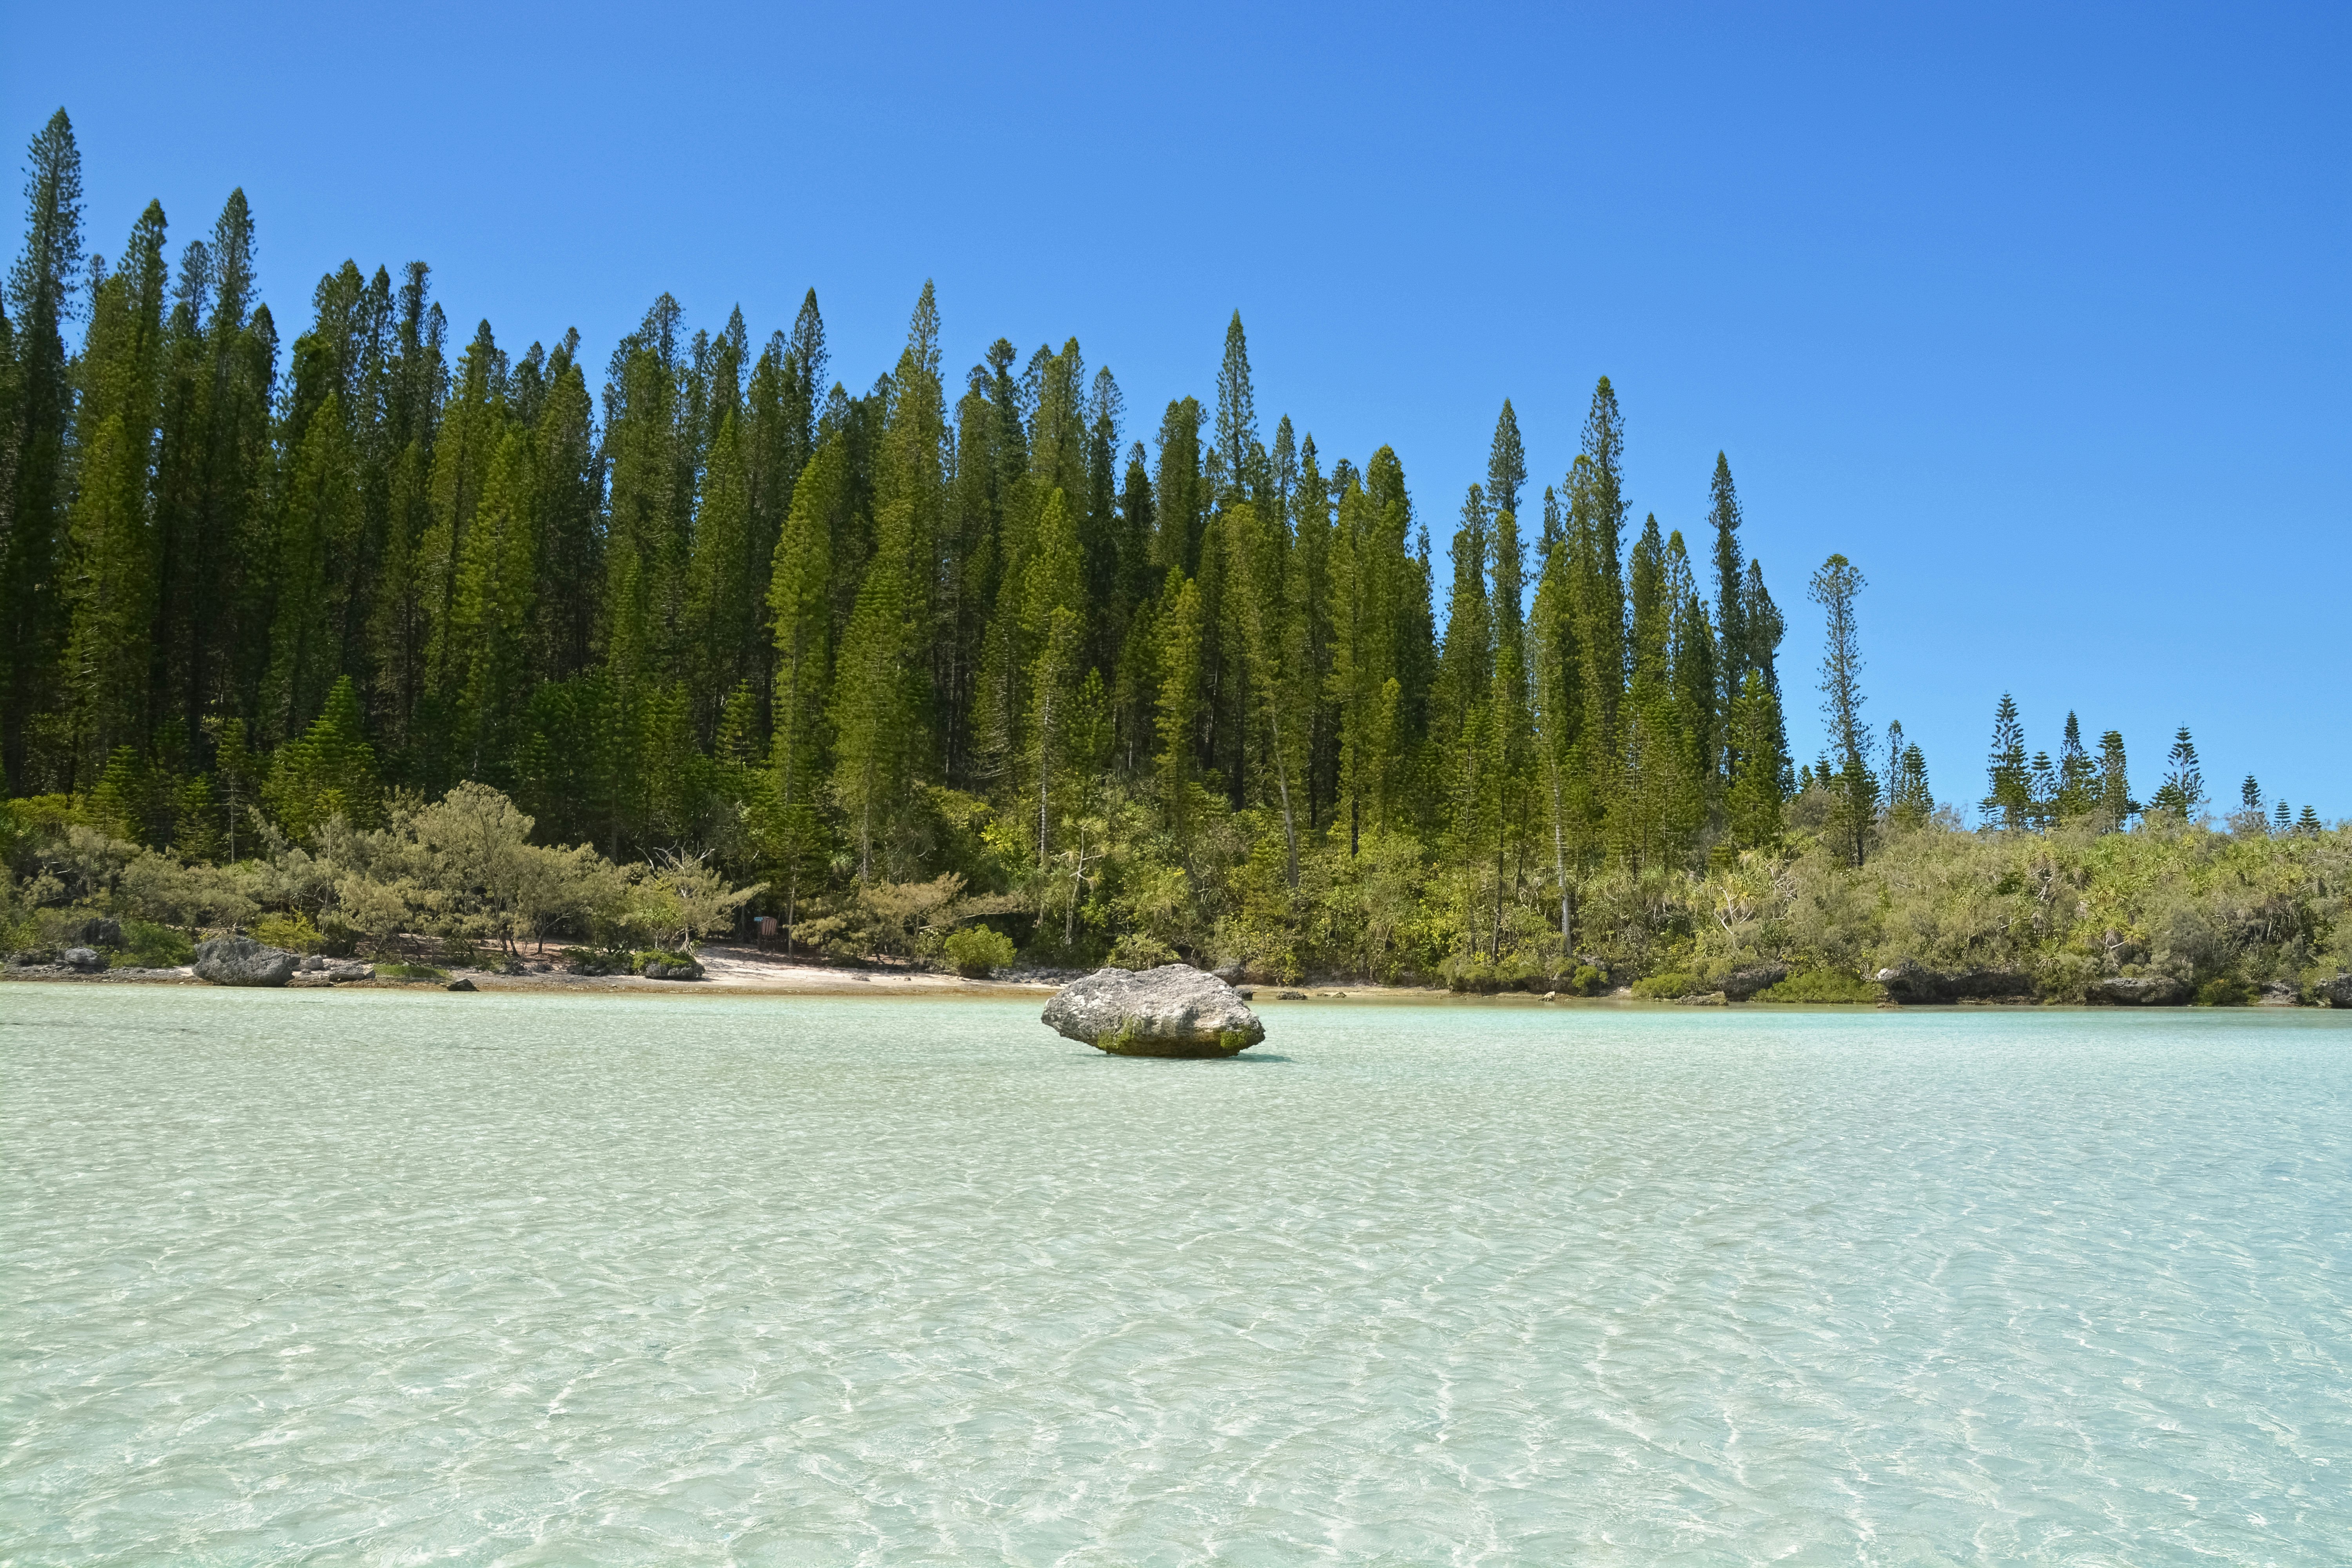 green pine trees on white sand near body of water during daytime